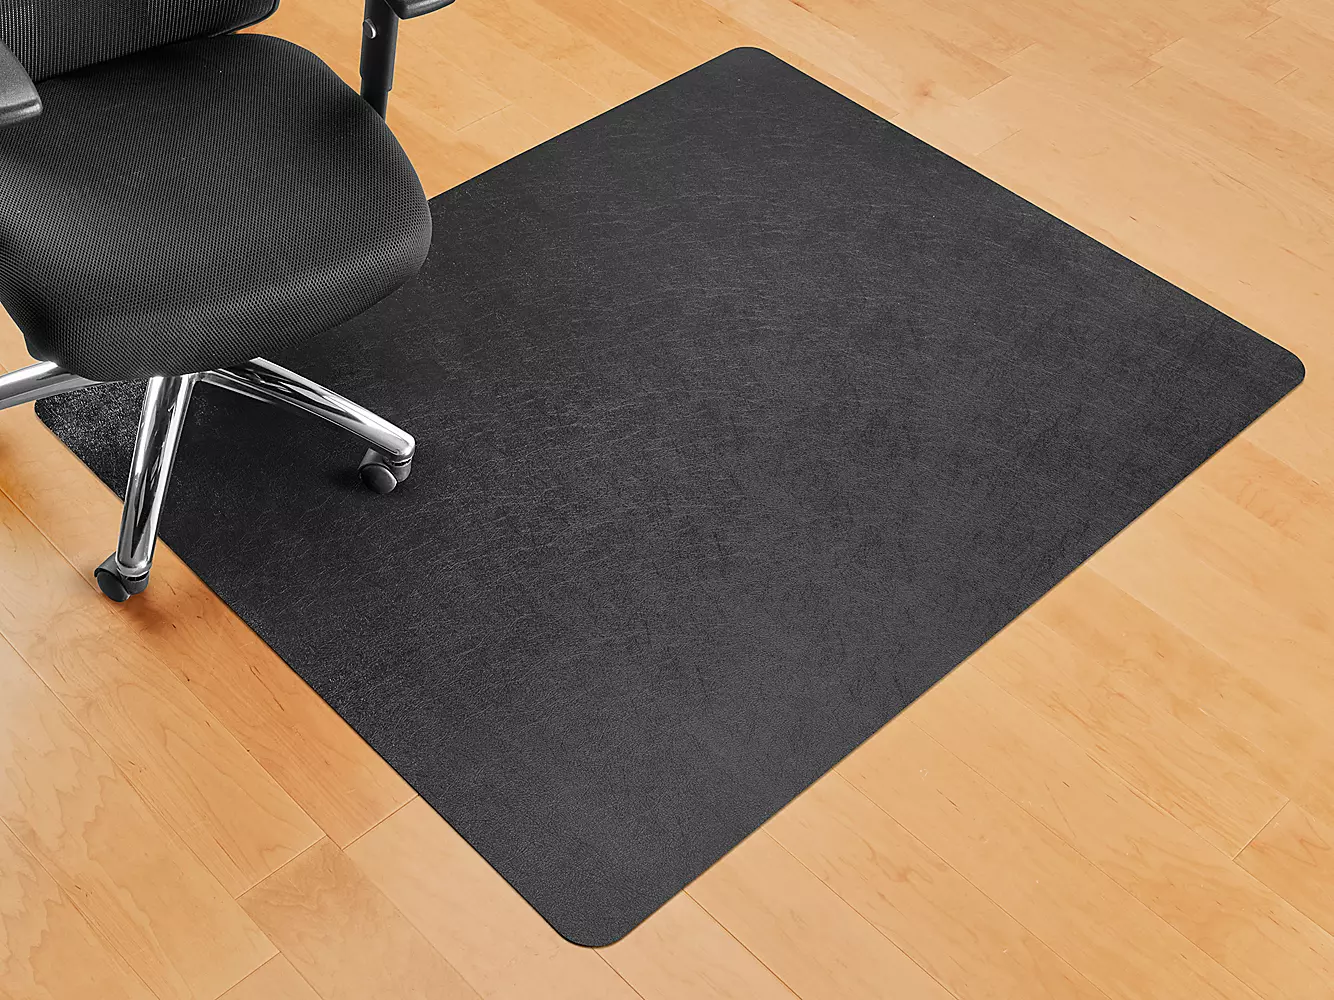 How To Choose The Right Office Mats?